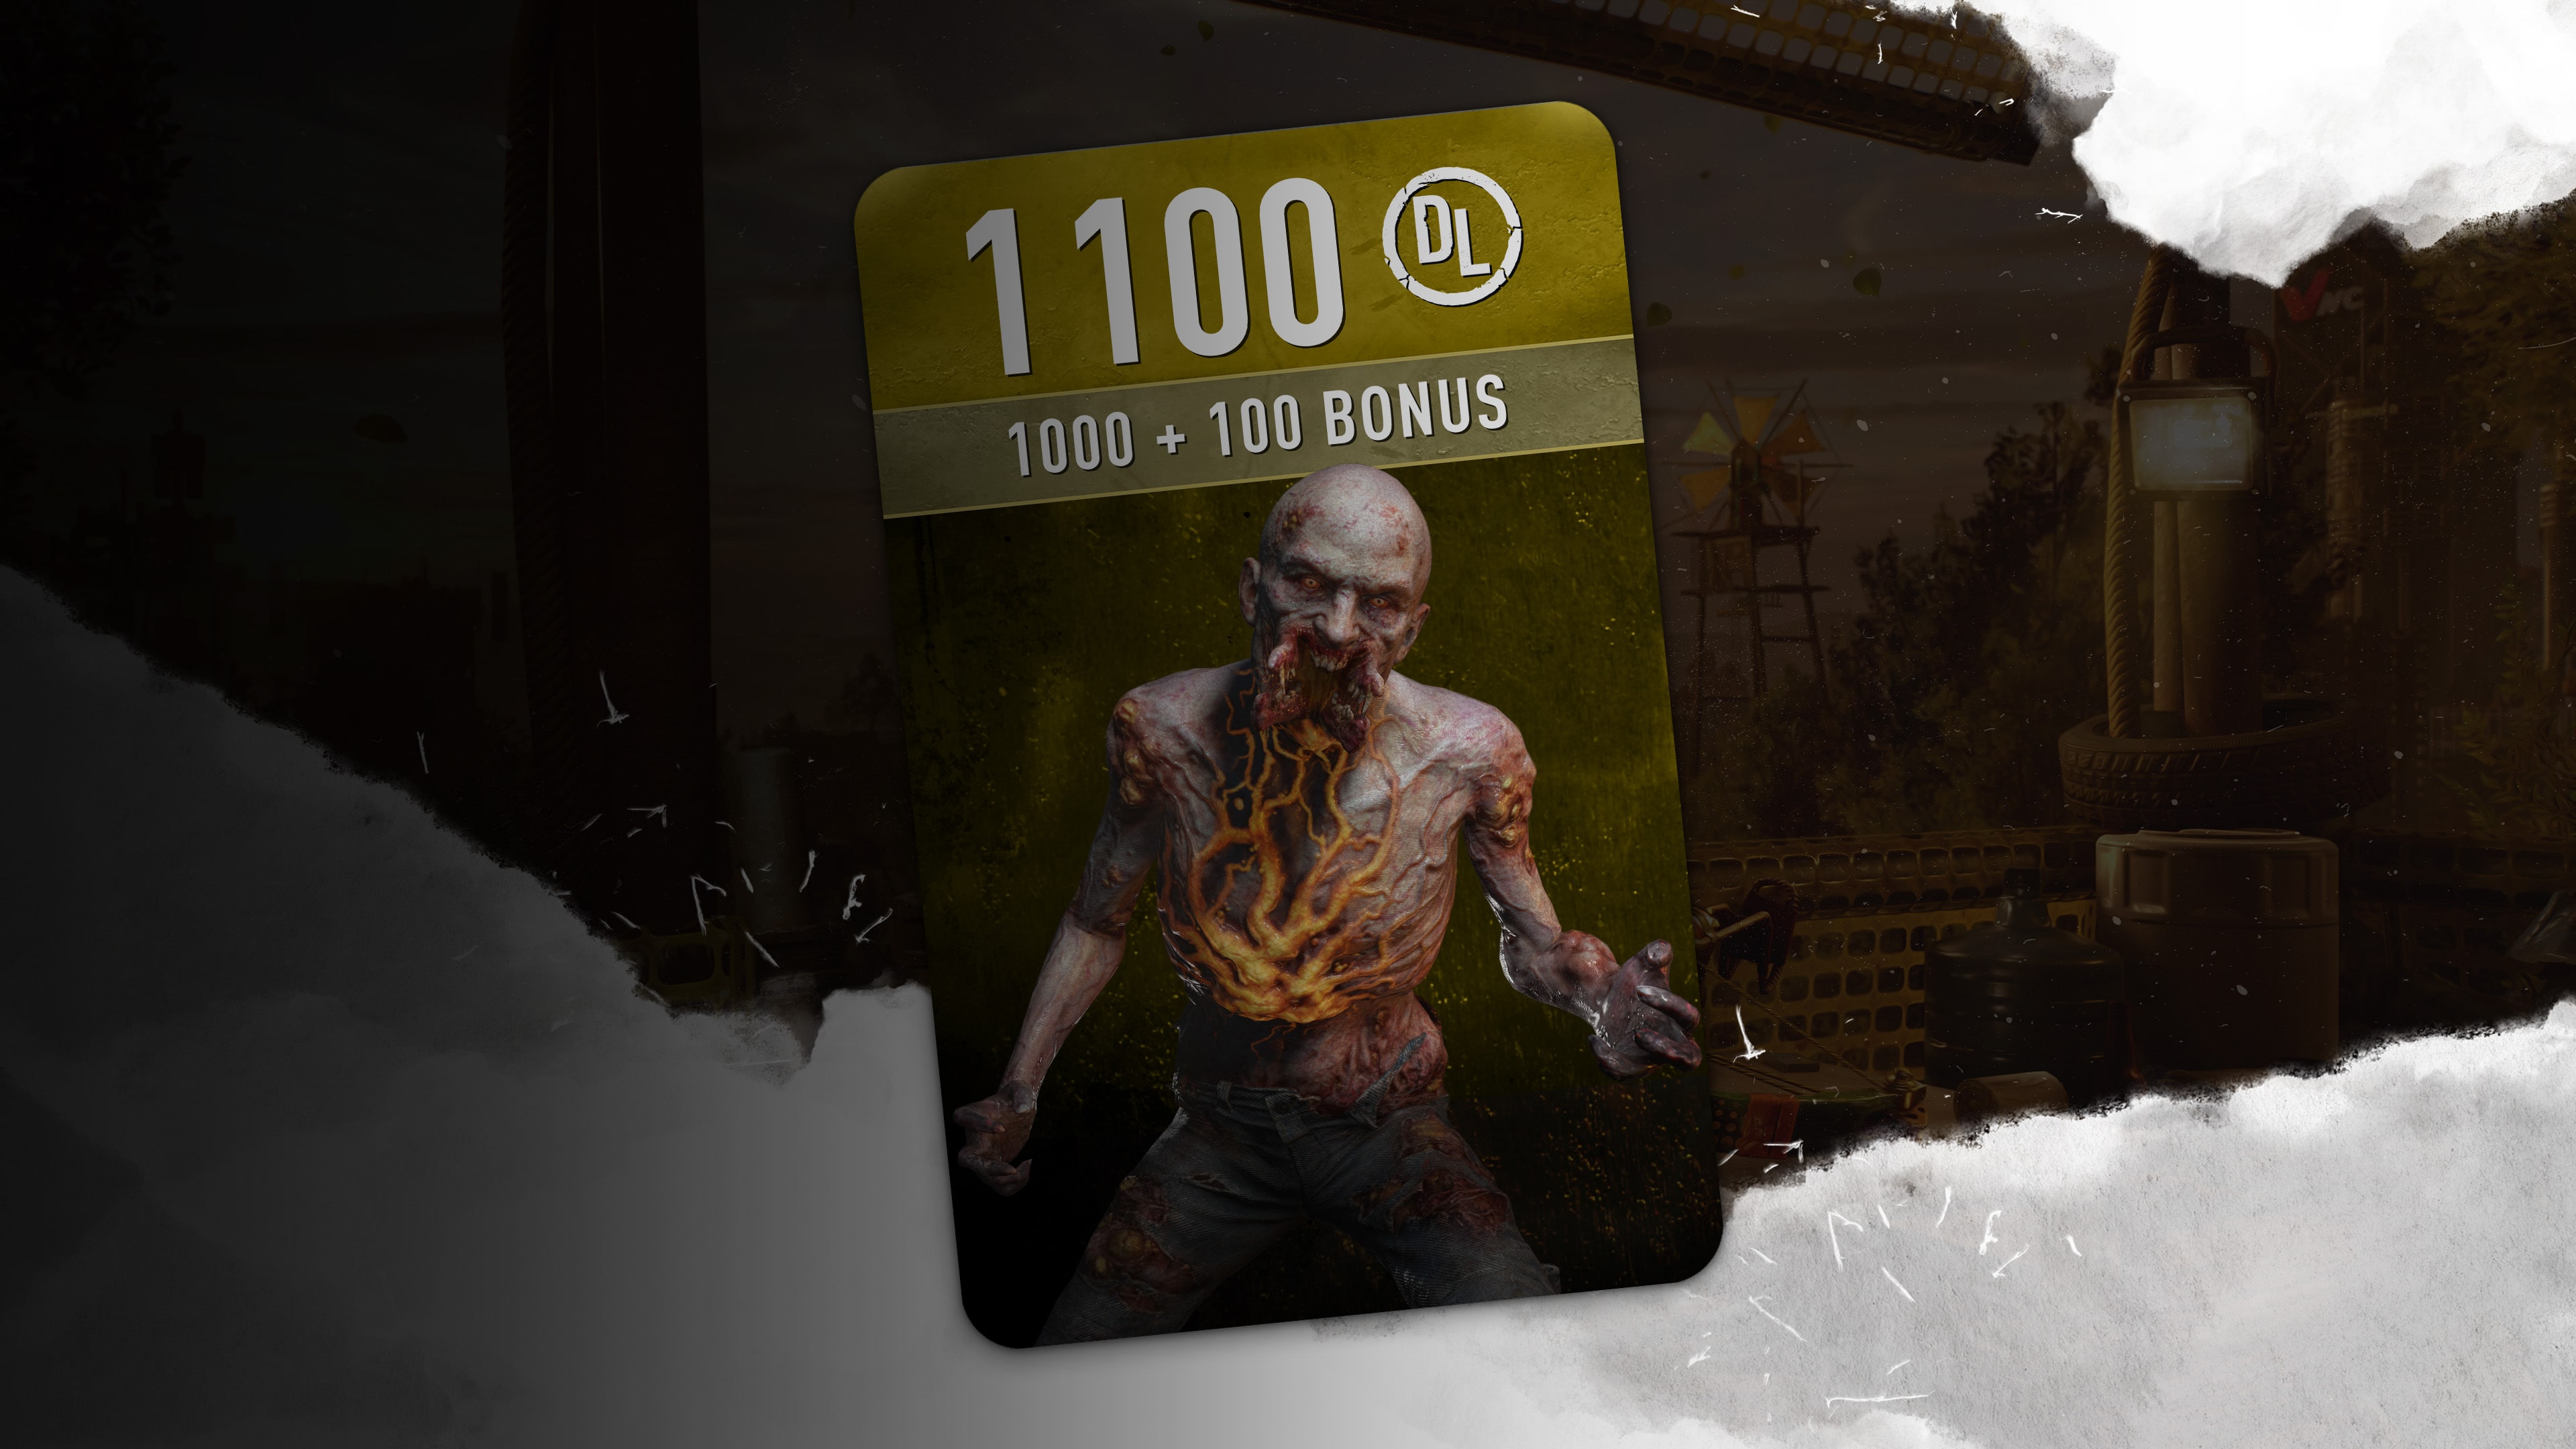 Dying Light 2 Stay Human - 1100 DL Points